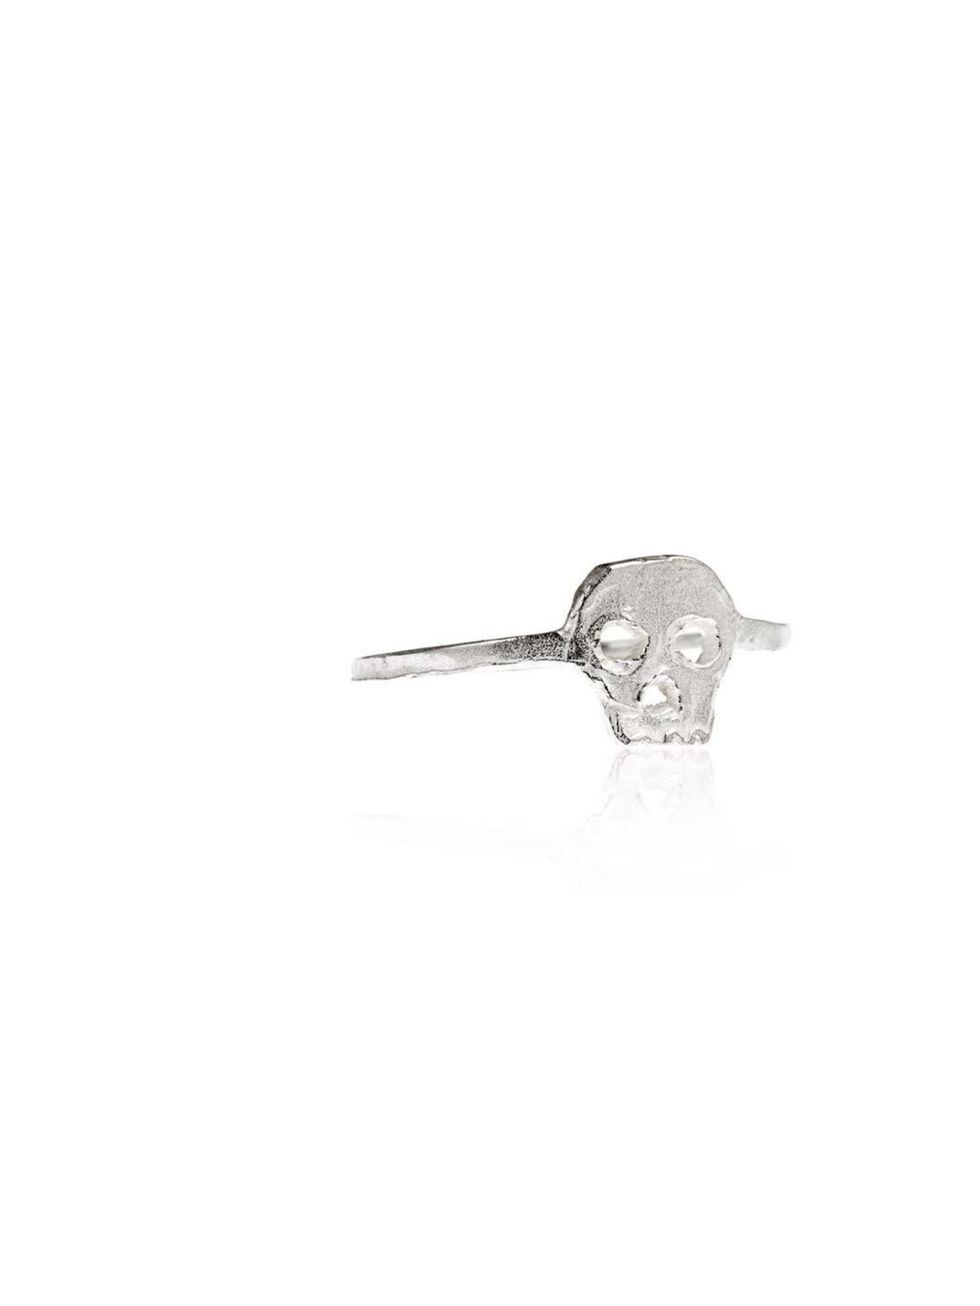 <p>We love the delicate execution of this rock'n'roll skull ring! Minimal silver jewellery will look more modern than gold against white shoes <a href="http://www.daisyknights.com/collections/kim/skull-ring/sterling-silver">Daisy Knights</a> sterling sil